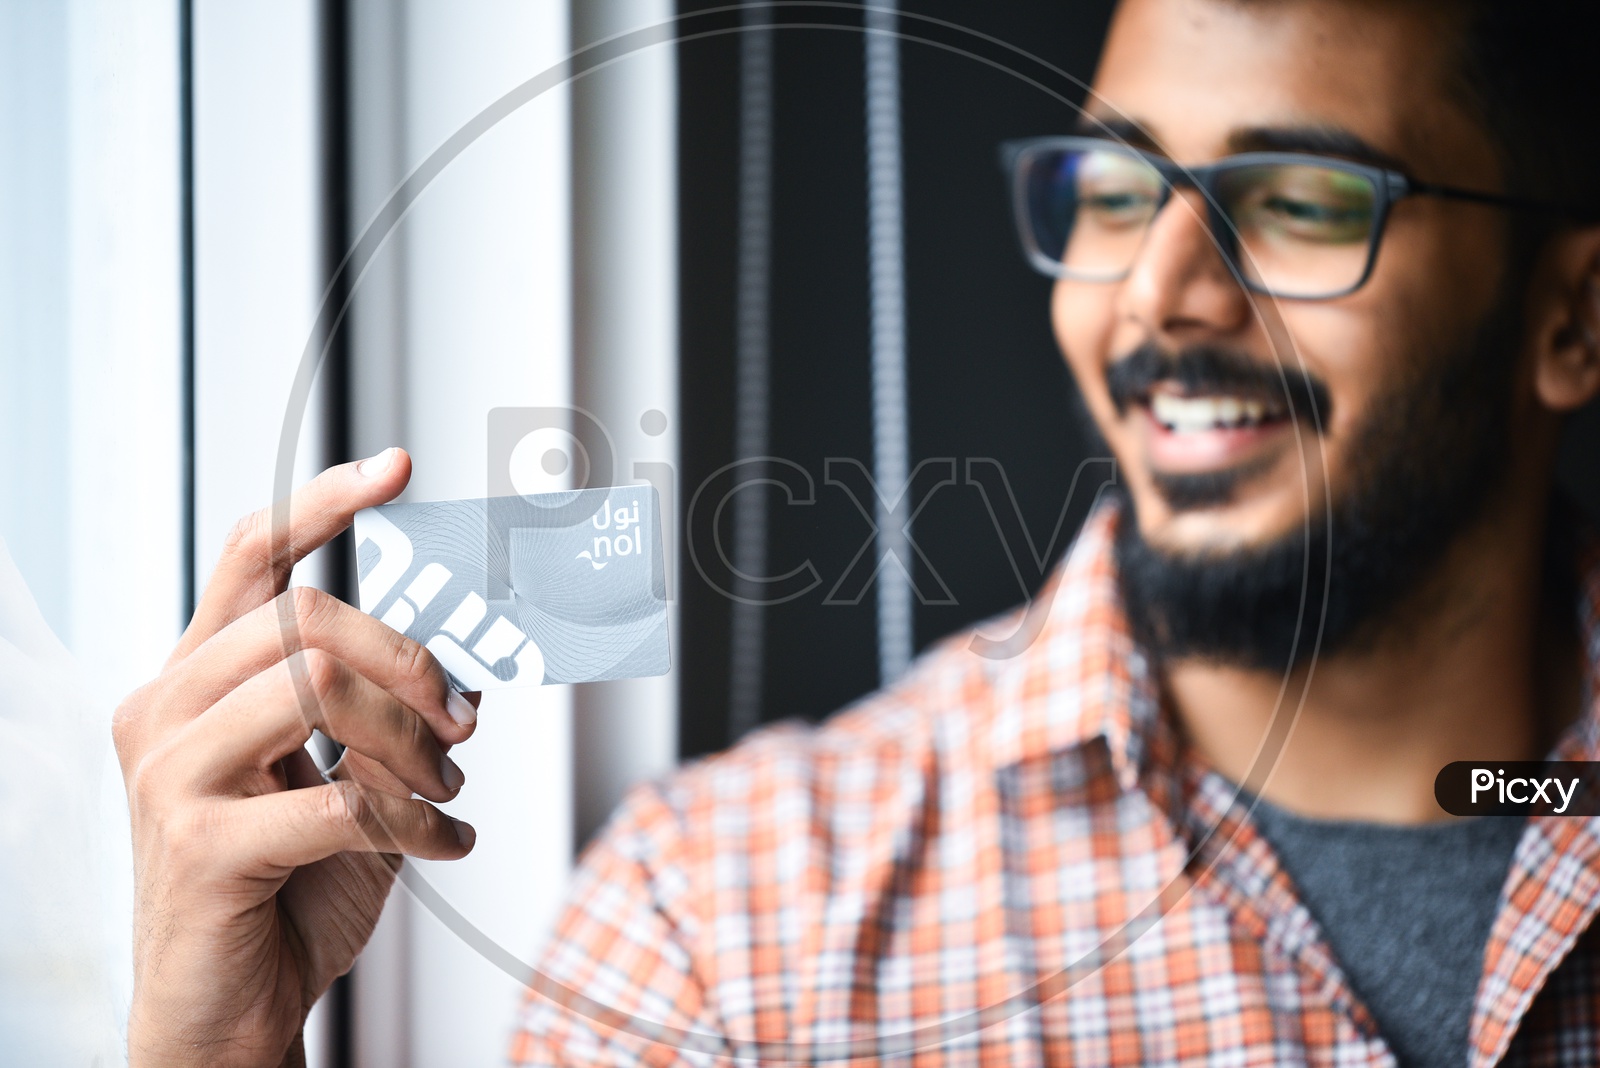 A Man Holding  Credit or Debit Or Card  in Hand  Closeup